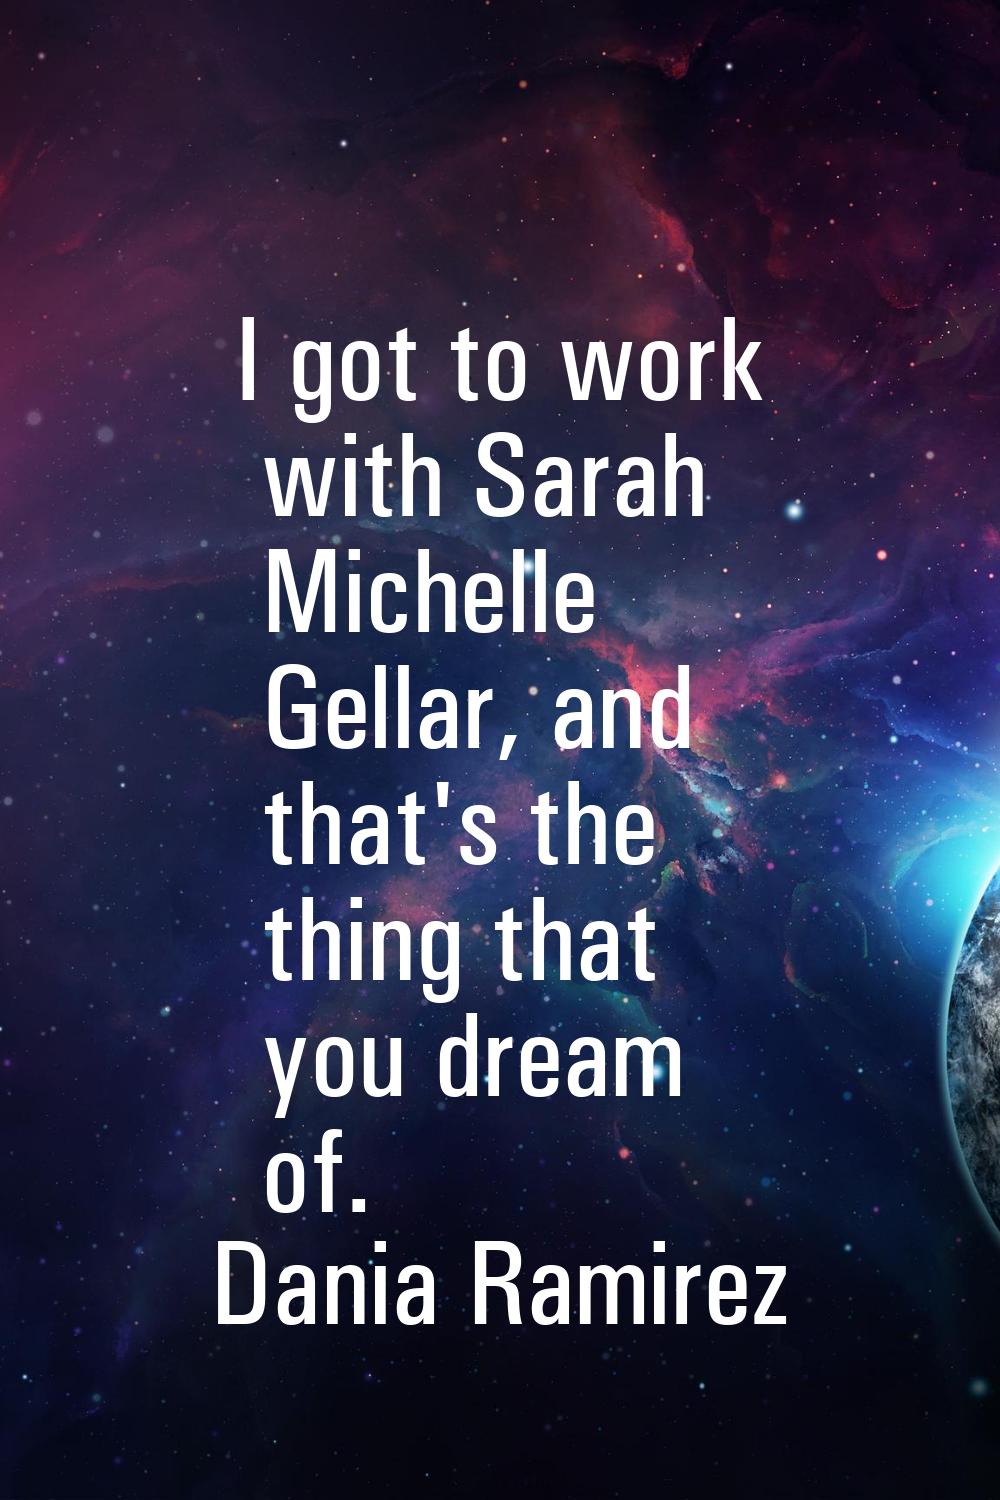 I got to work with Sarah Michelle Gellar, and that's the thing that you dream of.